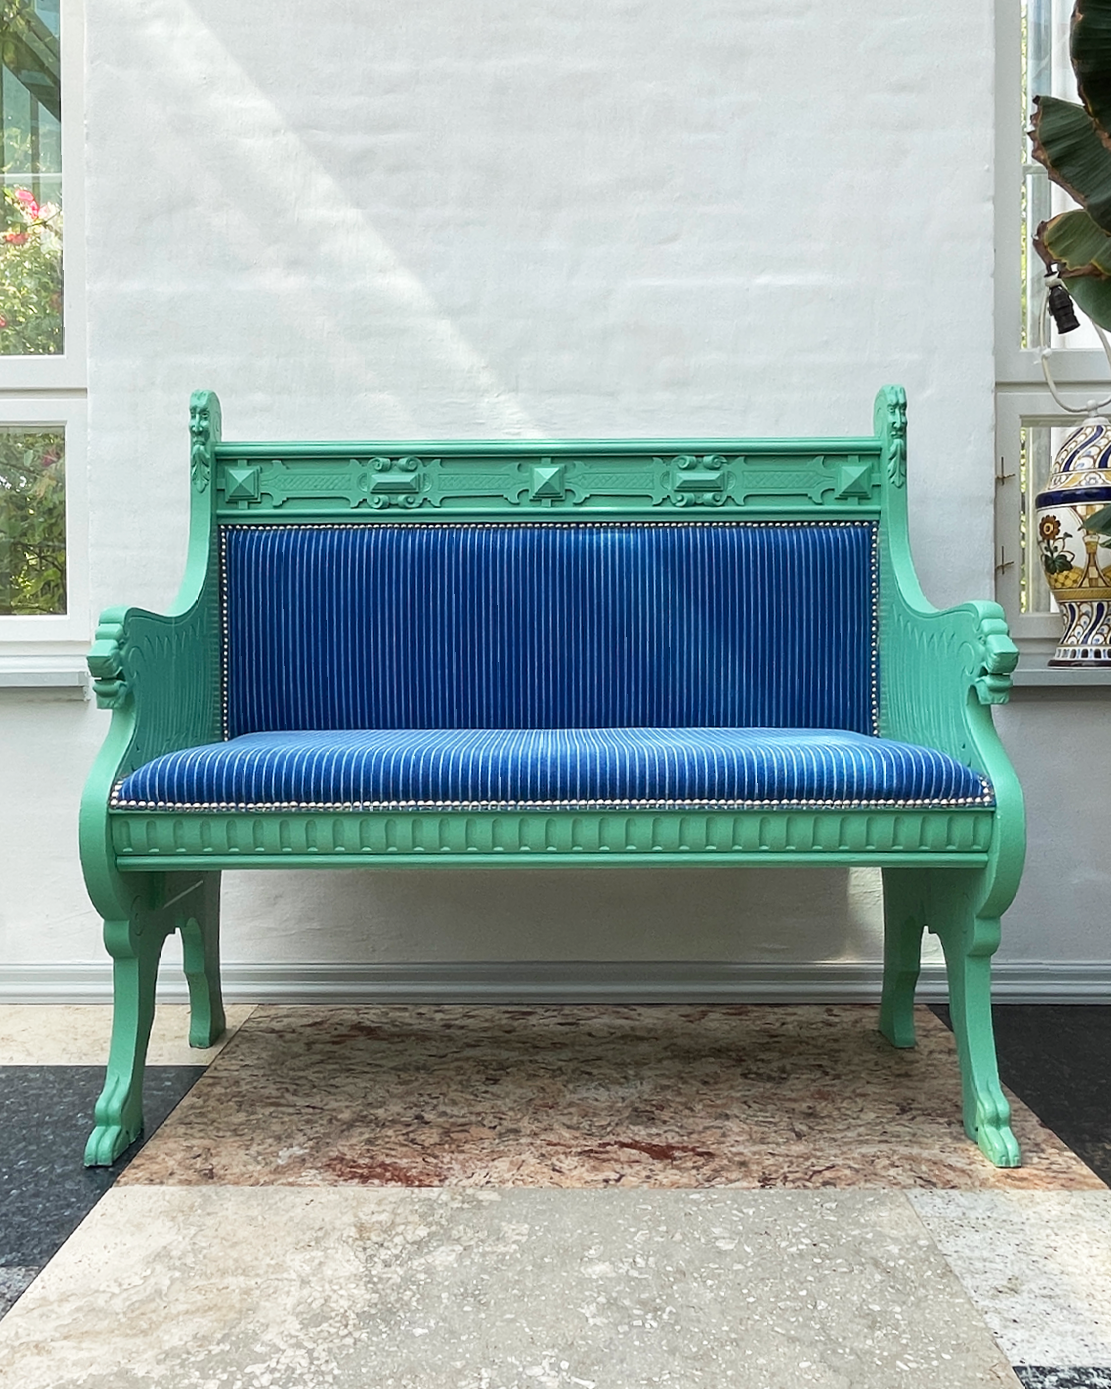 Antique Hand Painted Bench 1910s